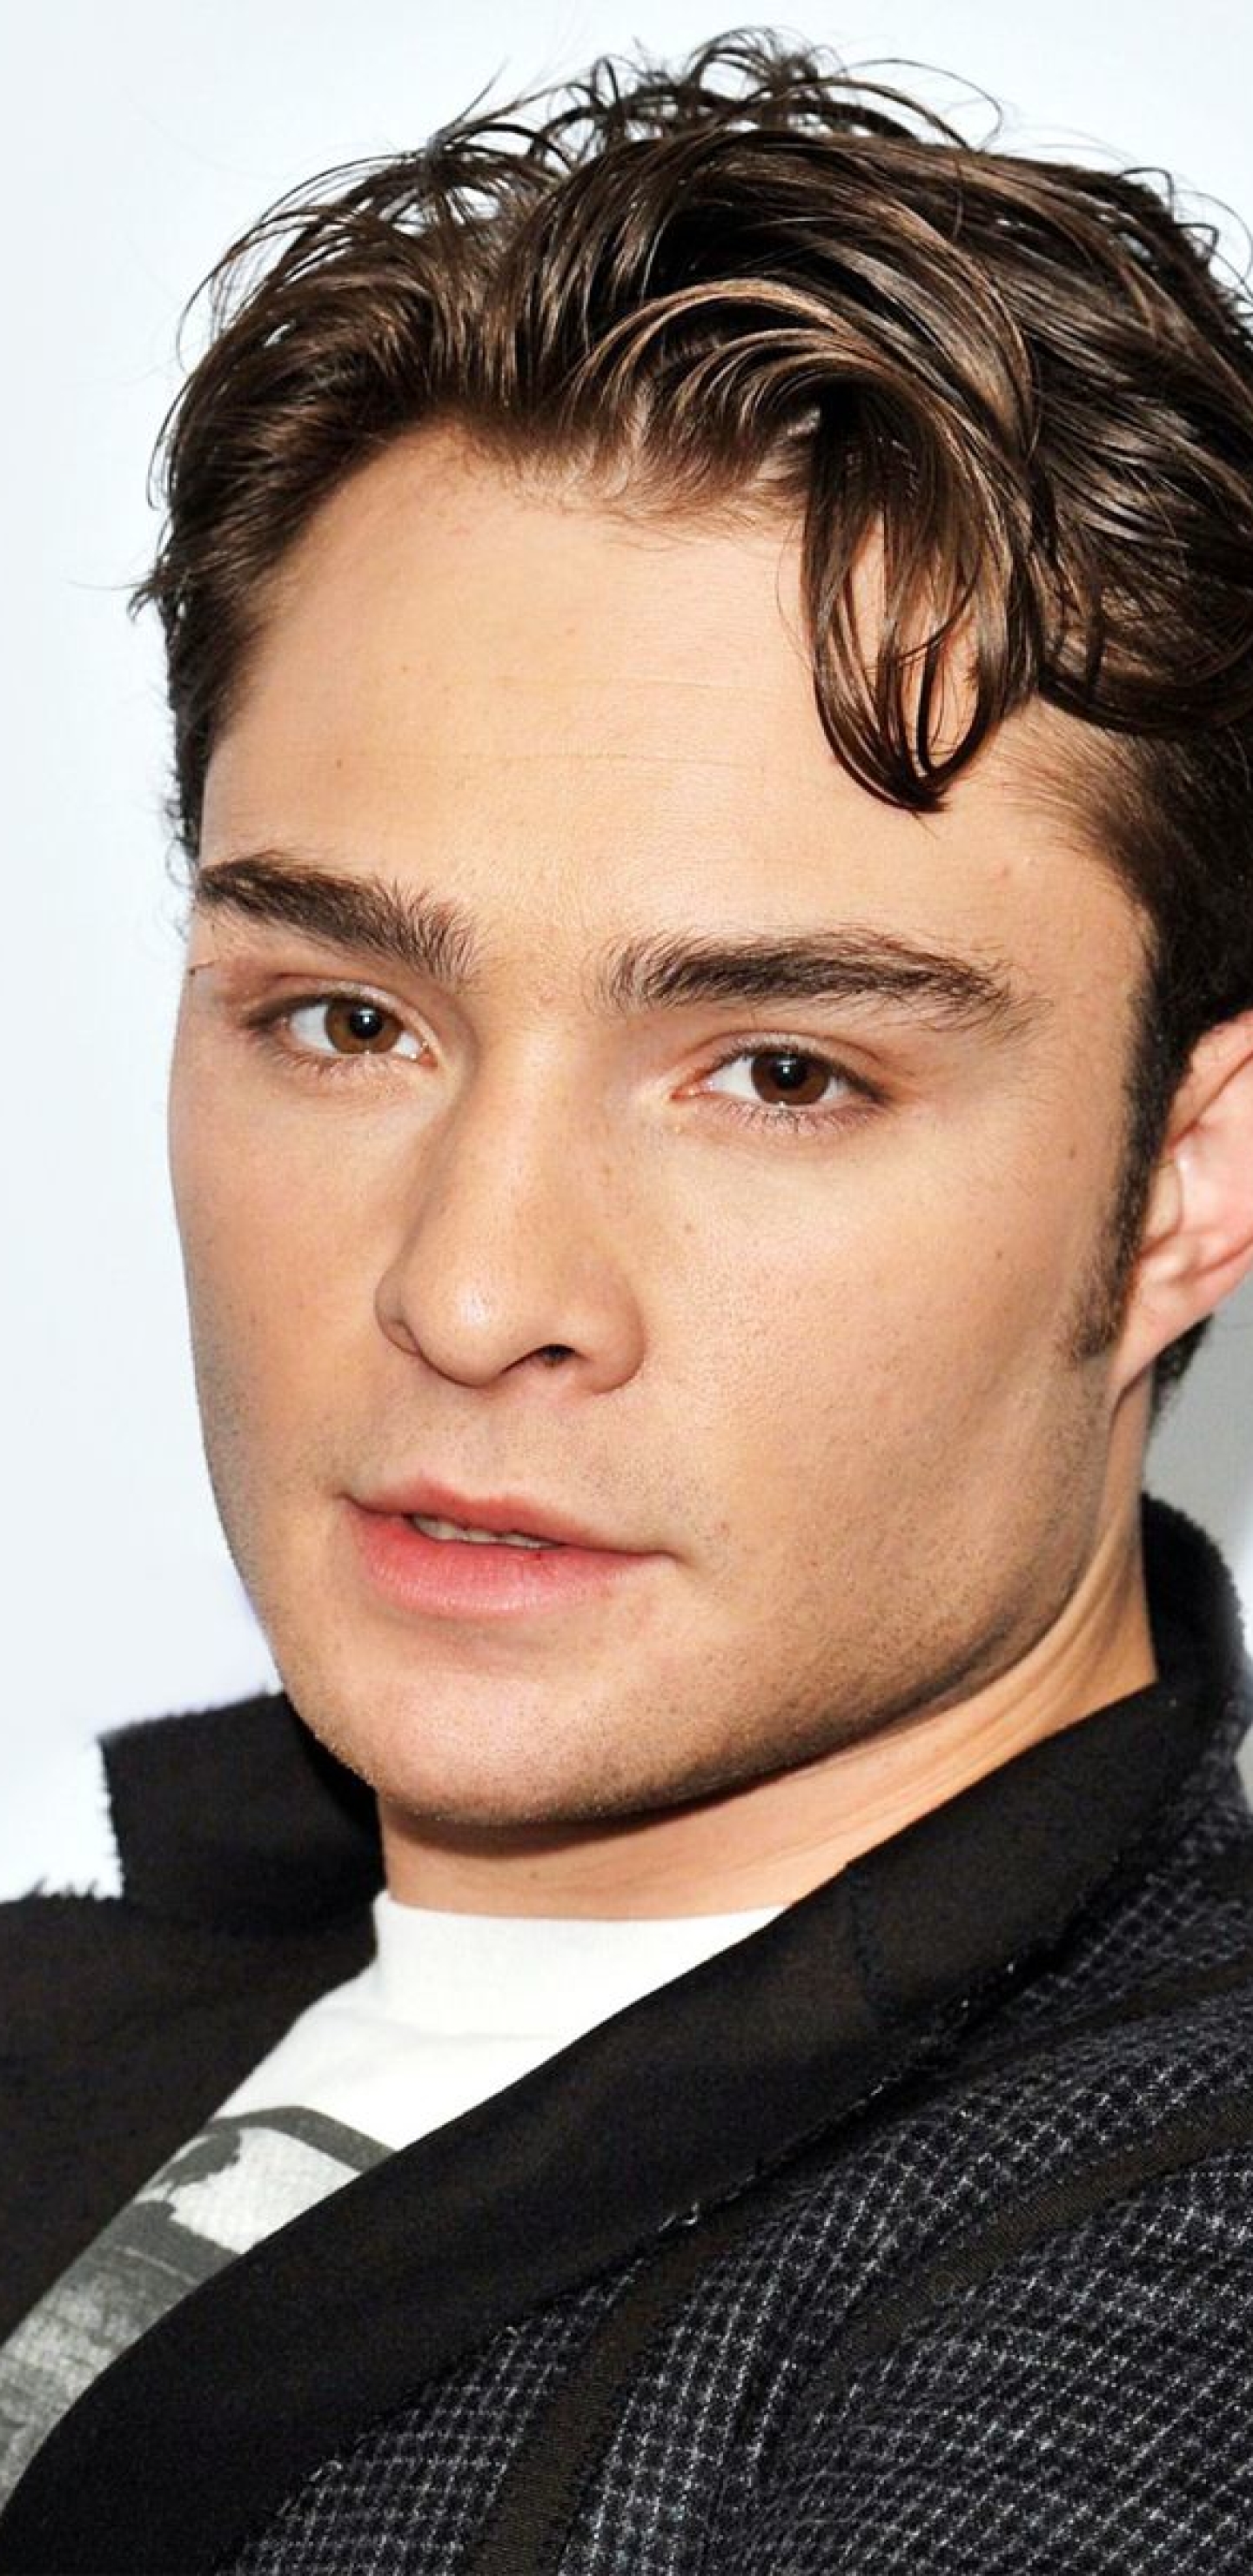 ed westwick, actor, face Samsung Galaxy Note S S8